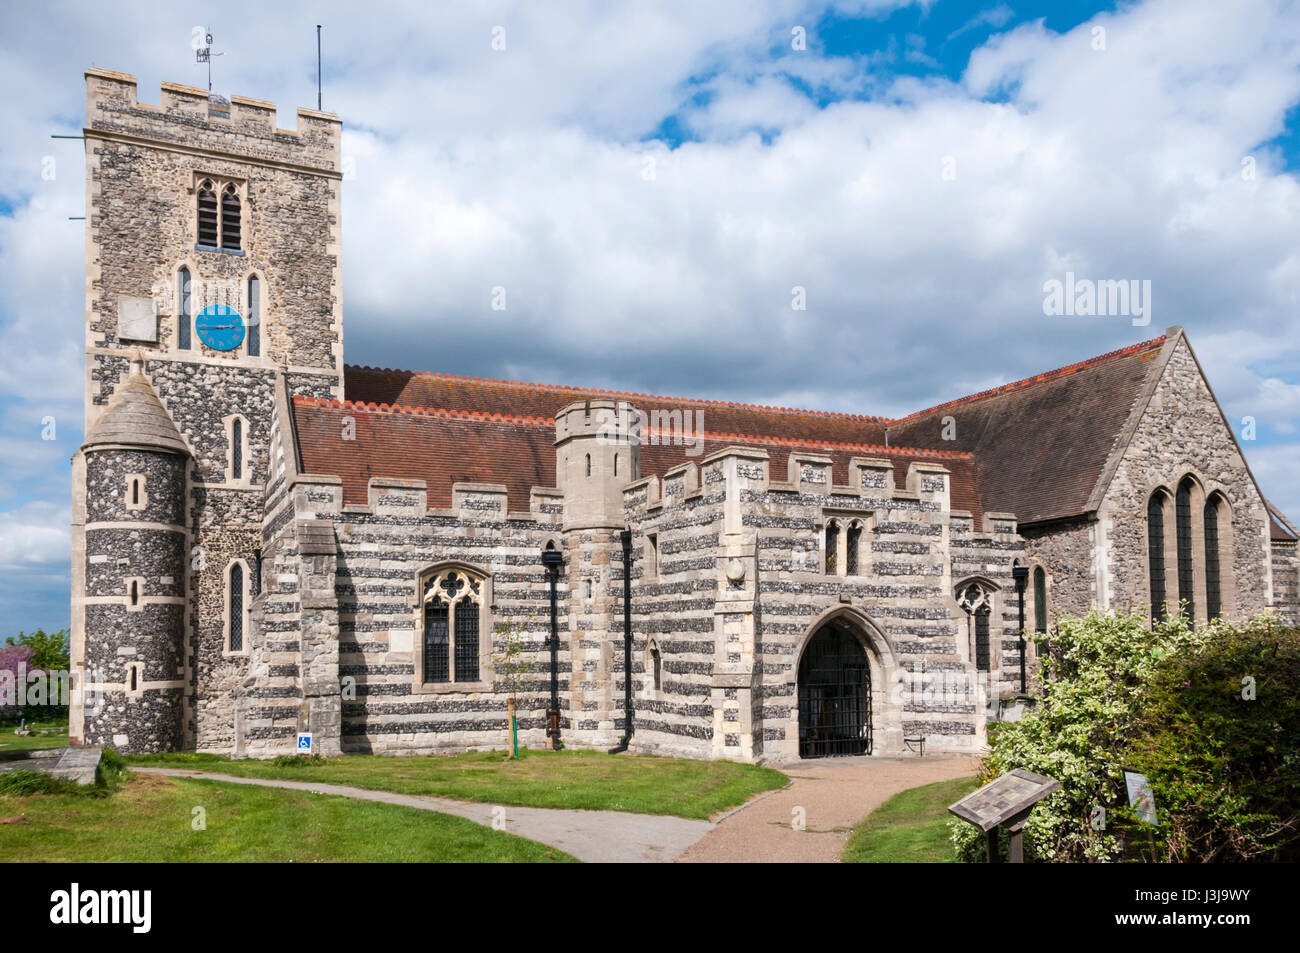 The walls of St Helen's church at Cliffe on the Hoo peninsula in Kent consist of alternating bands of ragstone and knapped flint. Stock Photo